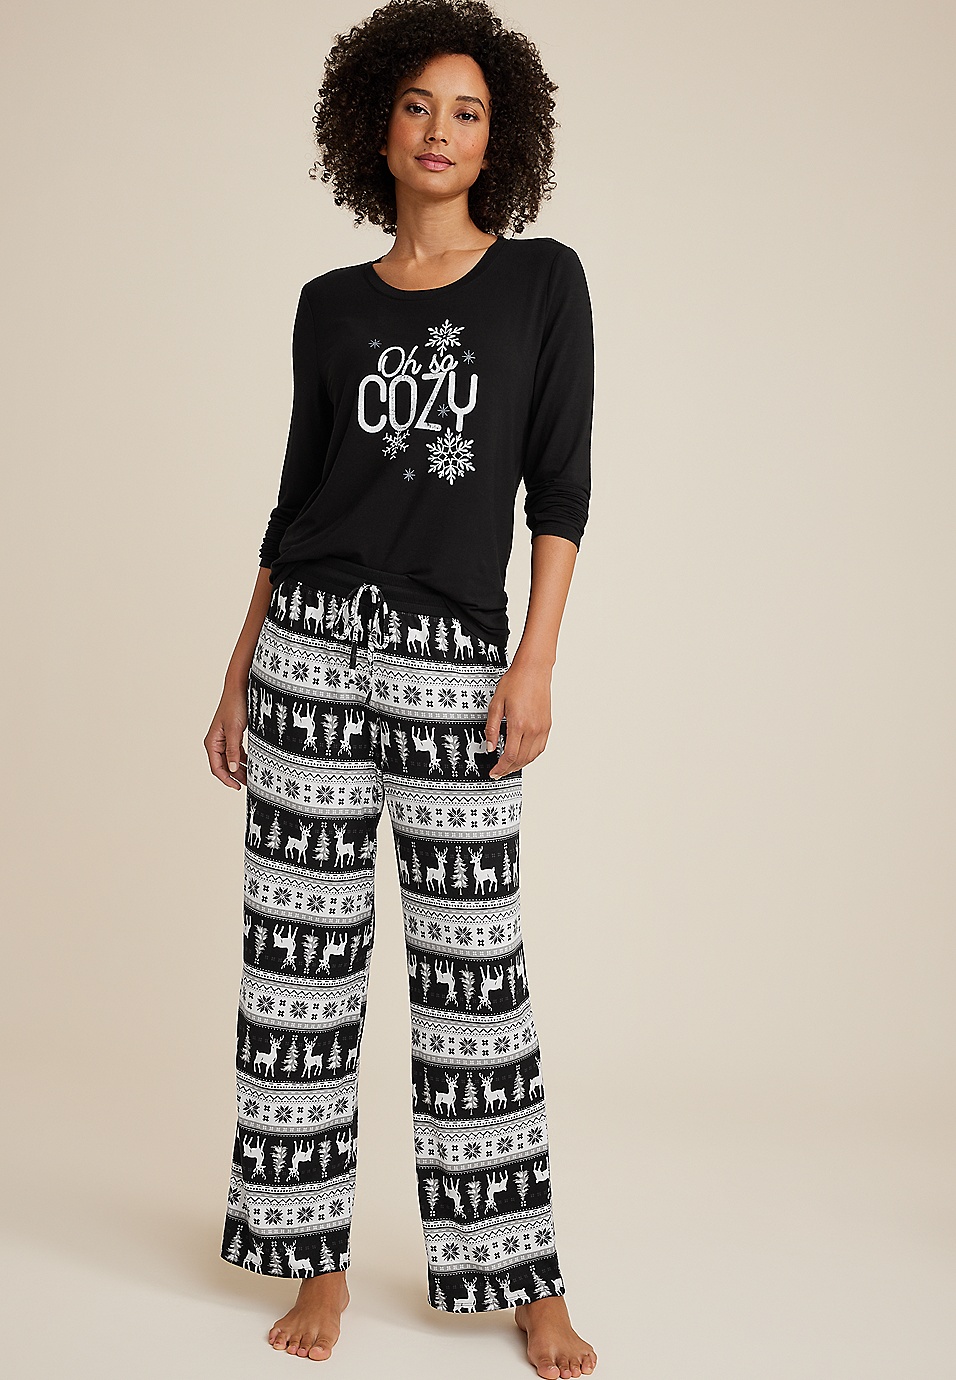 Oh So Cozy Graphic Tee And Wide Leg Pajama Set